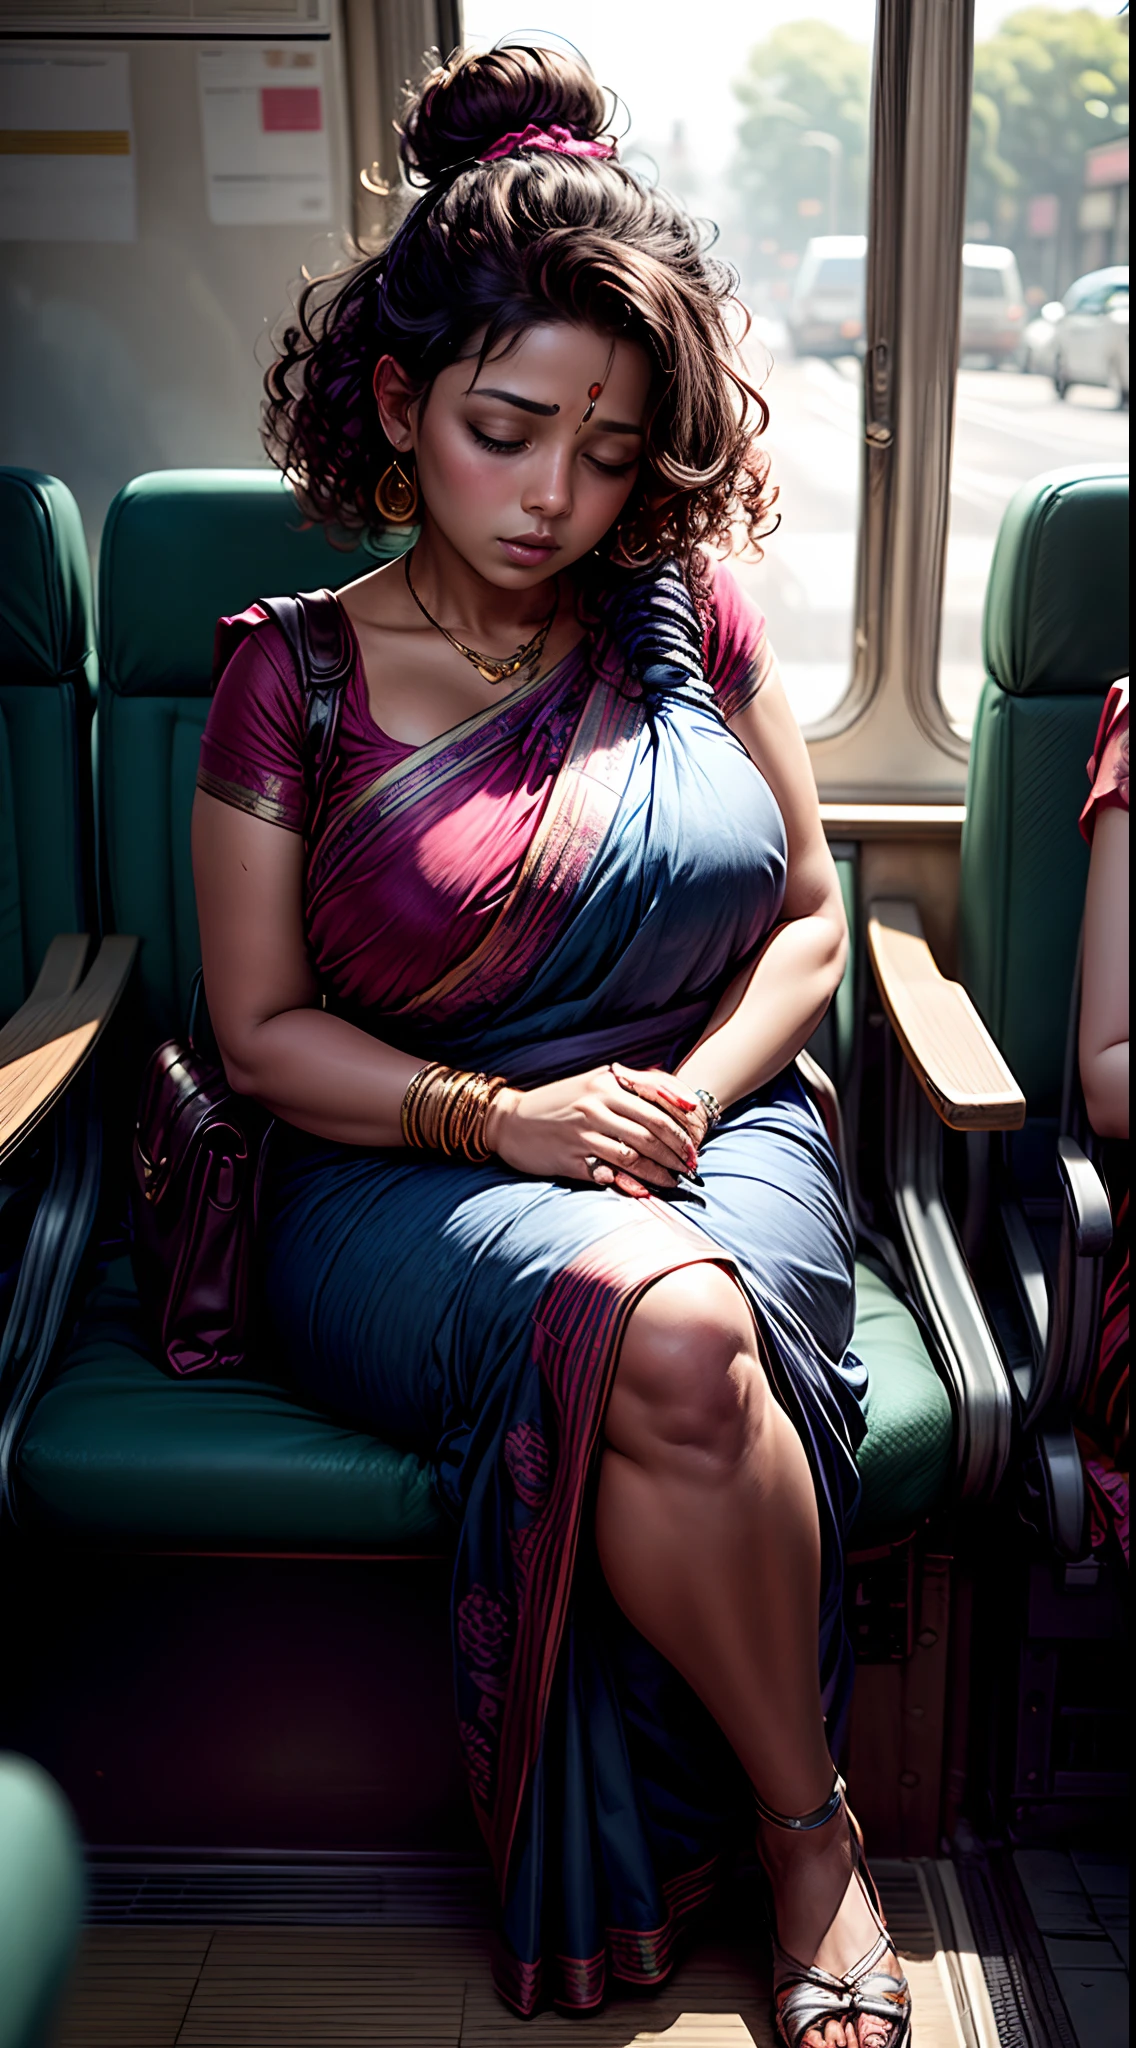 1 beautiful Indian woman, sleeping with her mouth open, lips open, sleeping sitting on the bus seat, curly hair, all hair tied up with a hair clip in a single bun, Indian silk saree, wide, blue bag, curvy woman; chubby woman, full body view,outlined eyes,  eyes closed, head resting on seat, sitting near window, head side down.